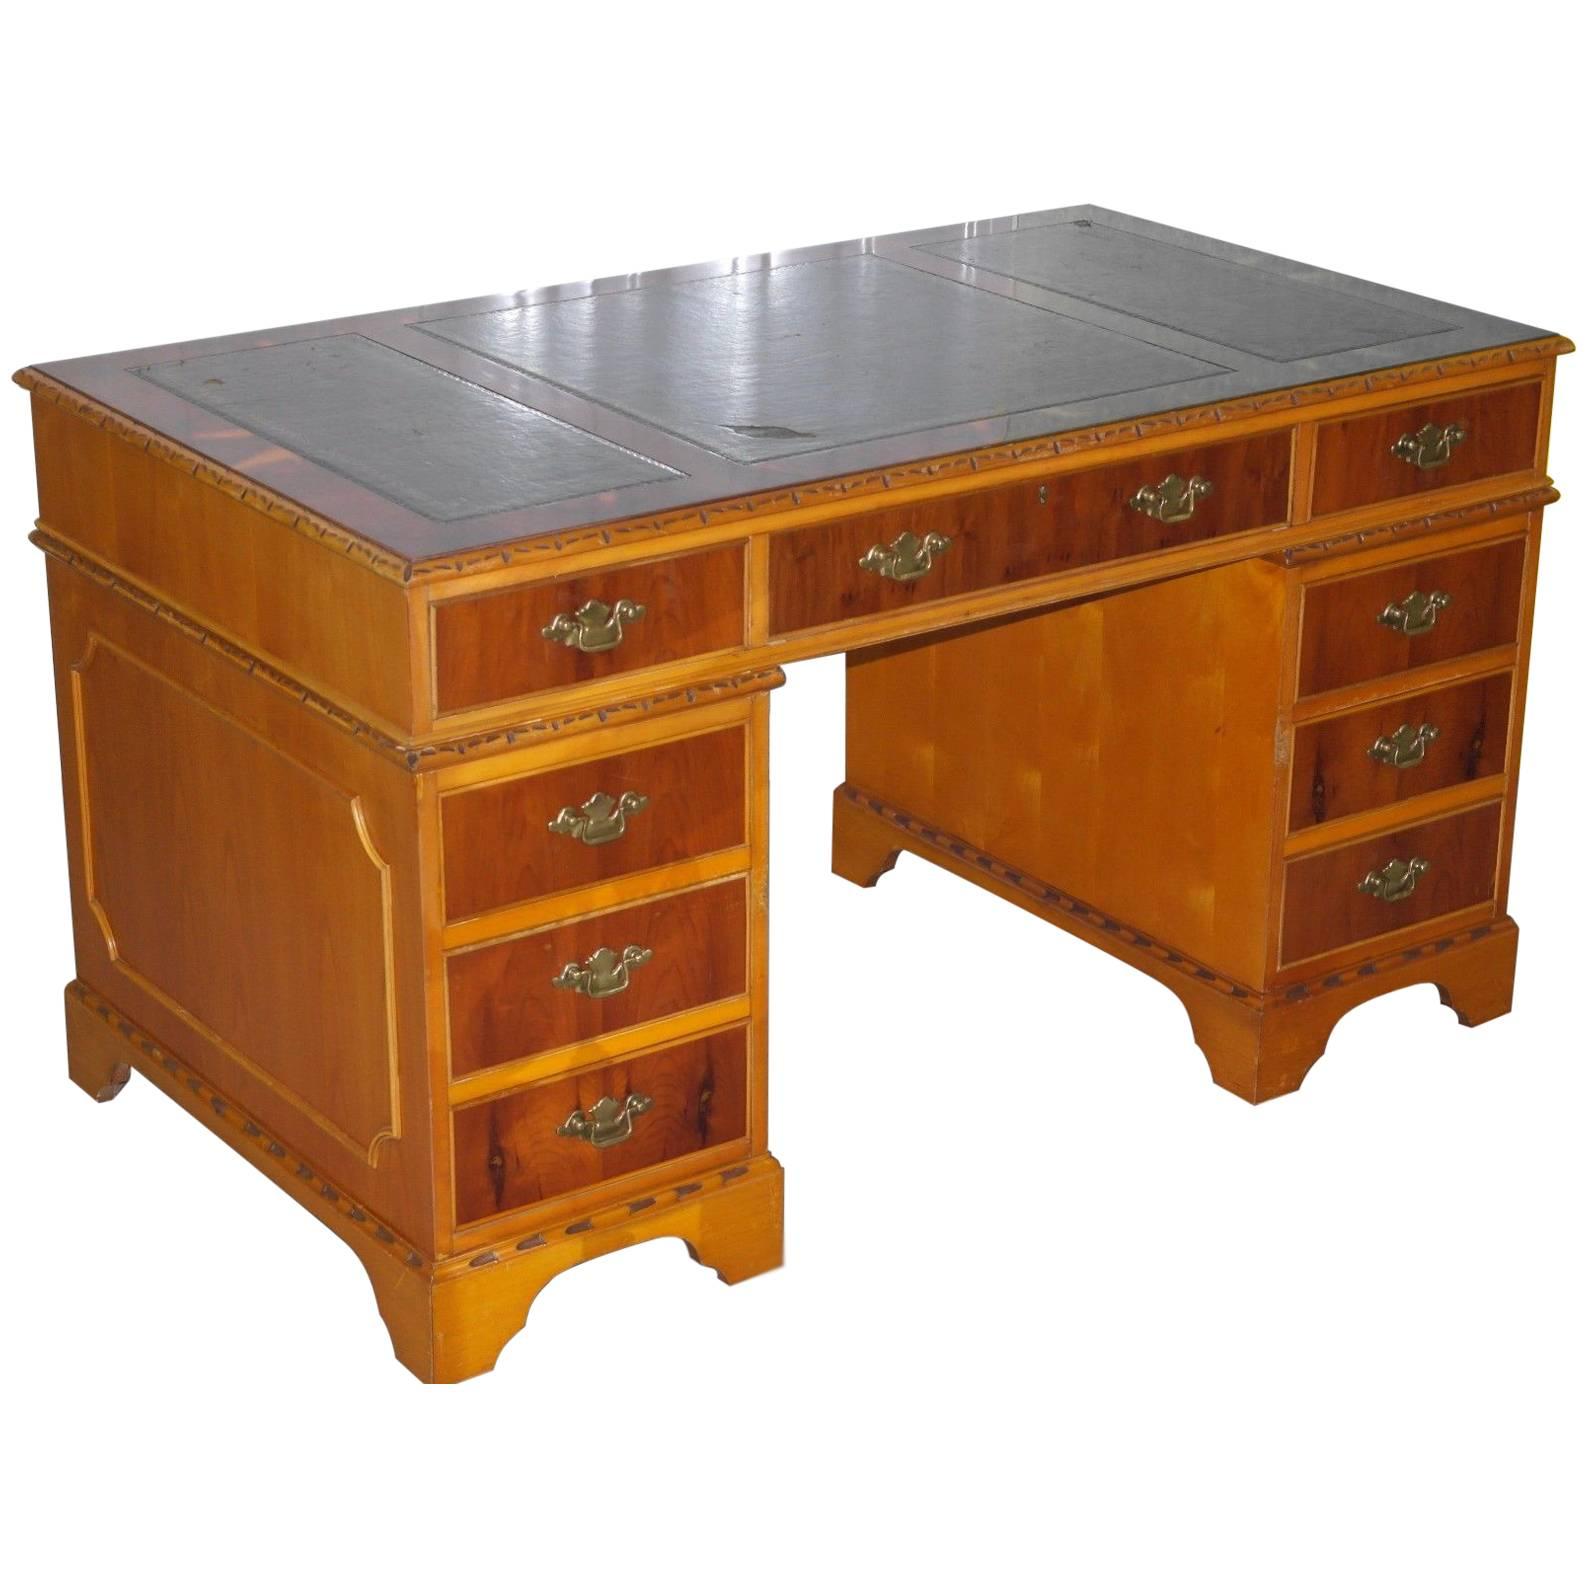 35 Year Old Premium Twin Pedestal Yew Wood Partner Desk Leather Writing Surface